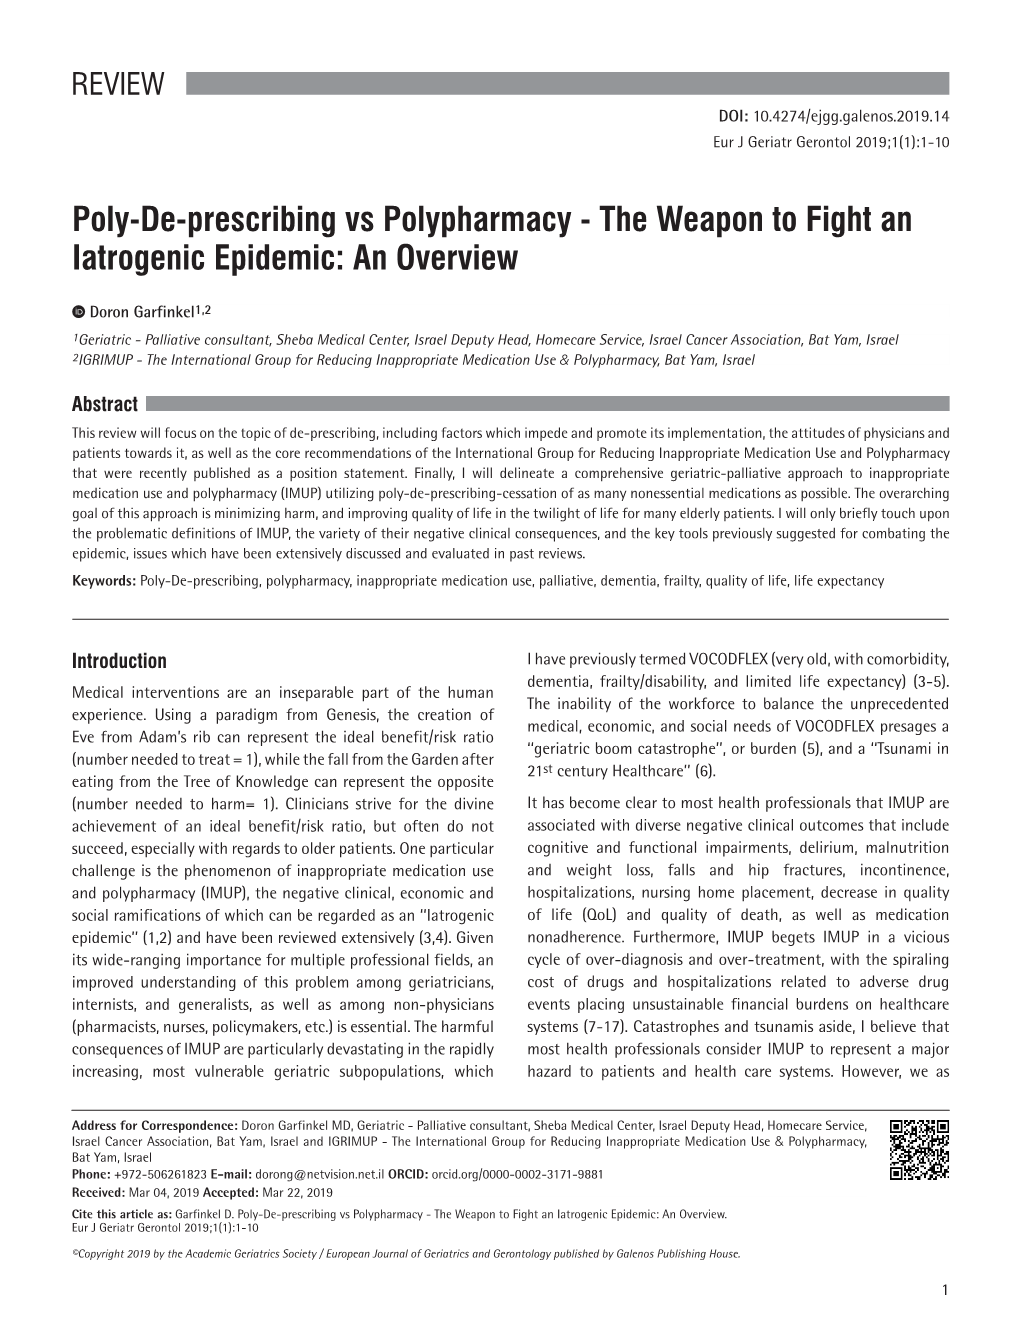 Poly-De-Prescribing Vs Polypharmacy - the Weapon to Fight an Iatrogenic Epidemic: an Overview